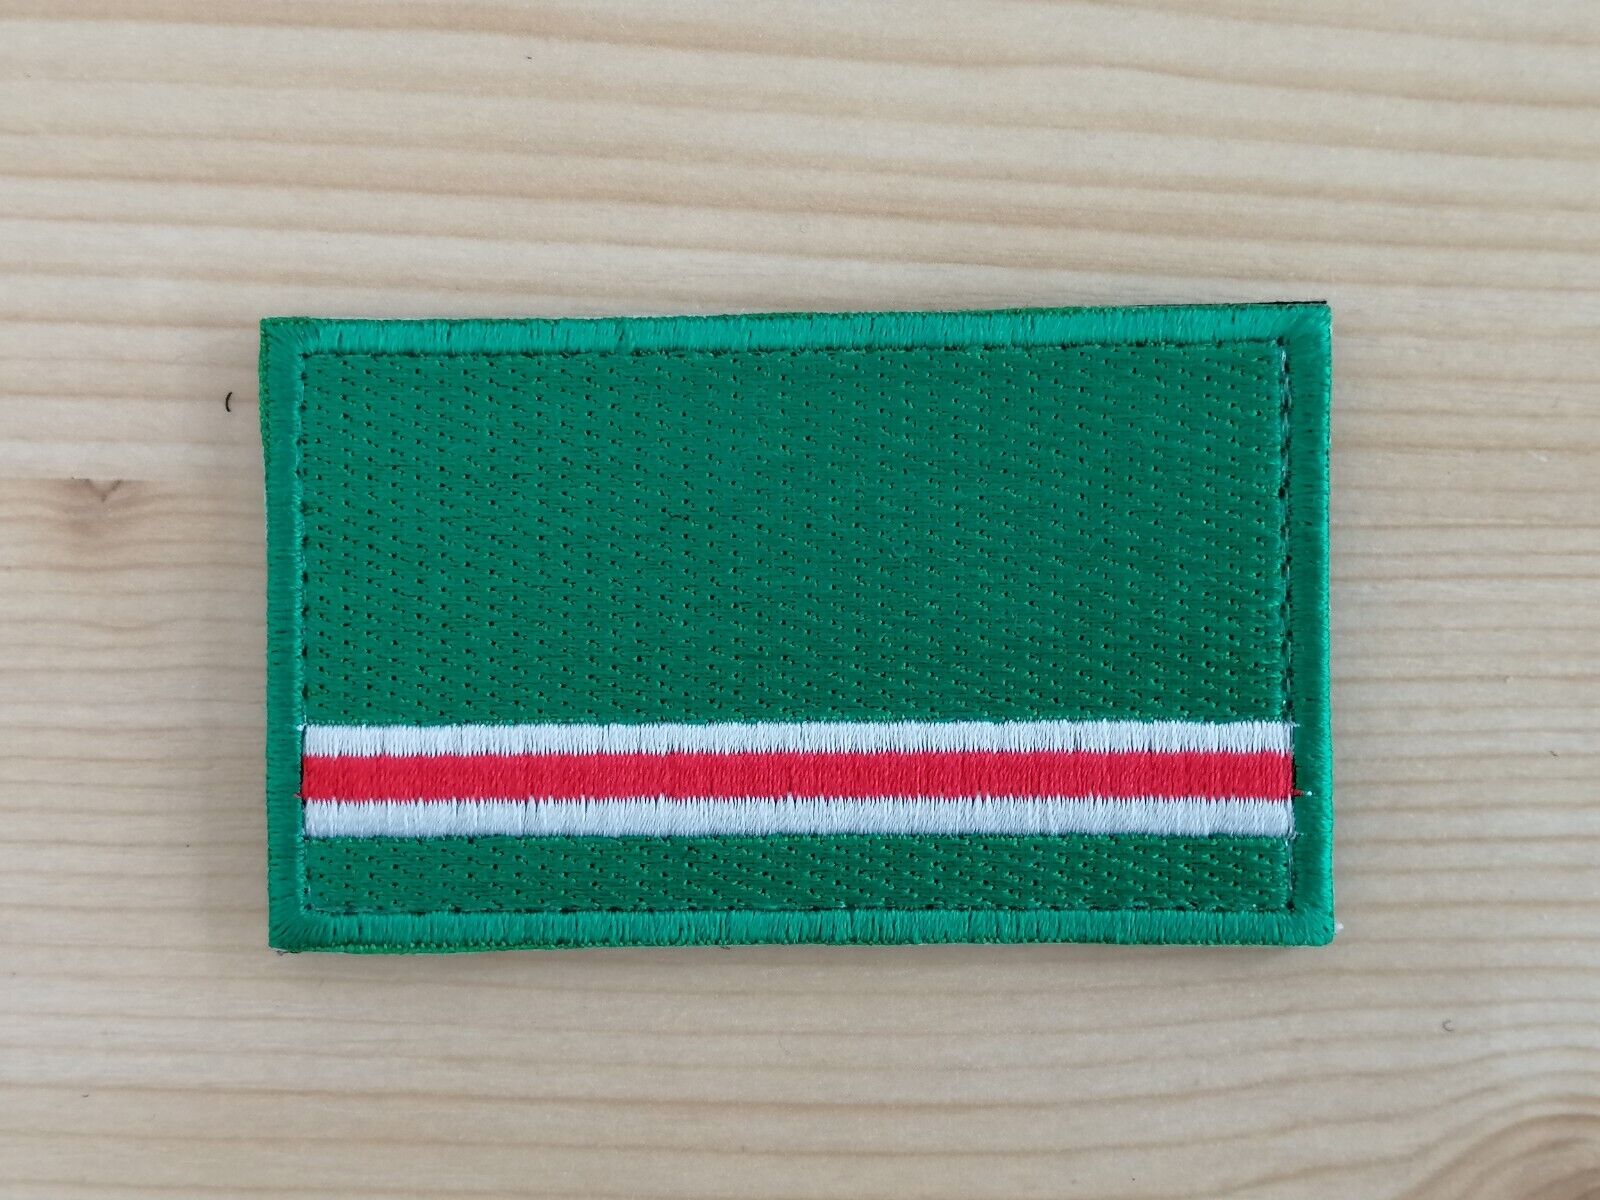 Chechen Republic of Ichkeria flag embroidered patch UKRAINIAN ARMY PATCH